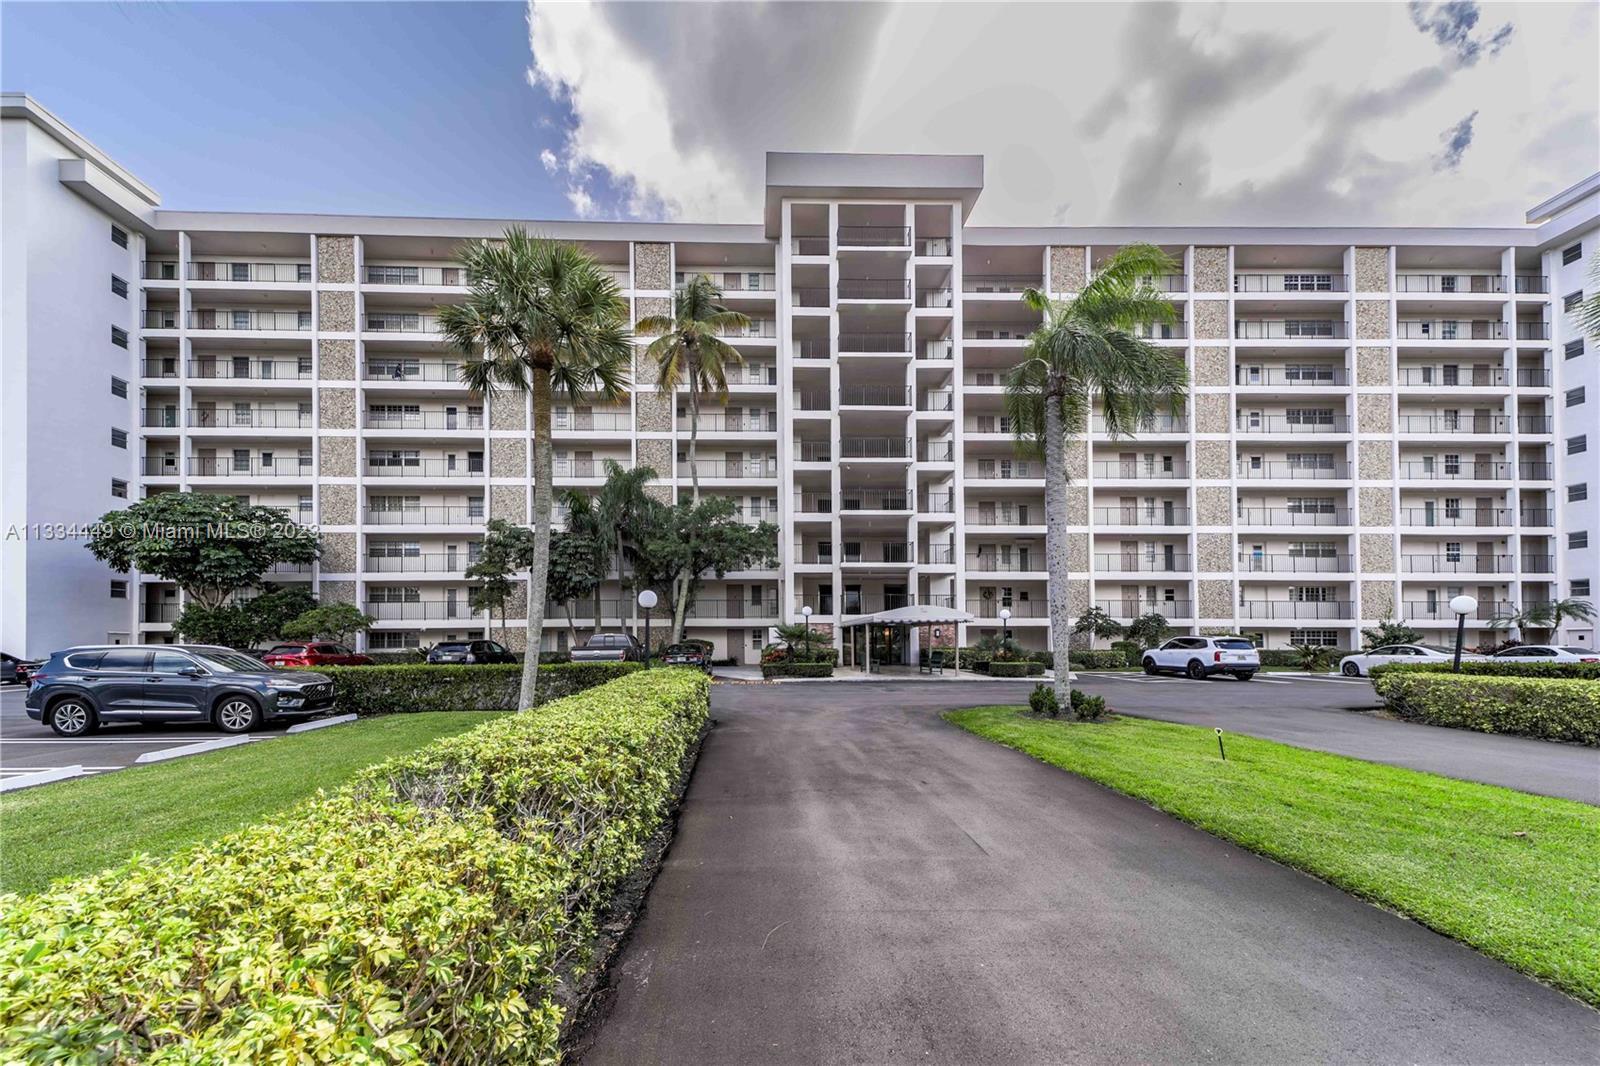 Excellent 1/1.5 in Palm Aire Area. All ages. Updated unit. Beautiful Golf views. Maintenance only $1